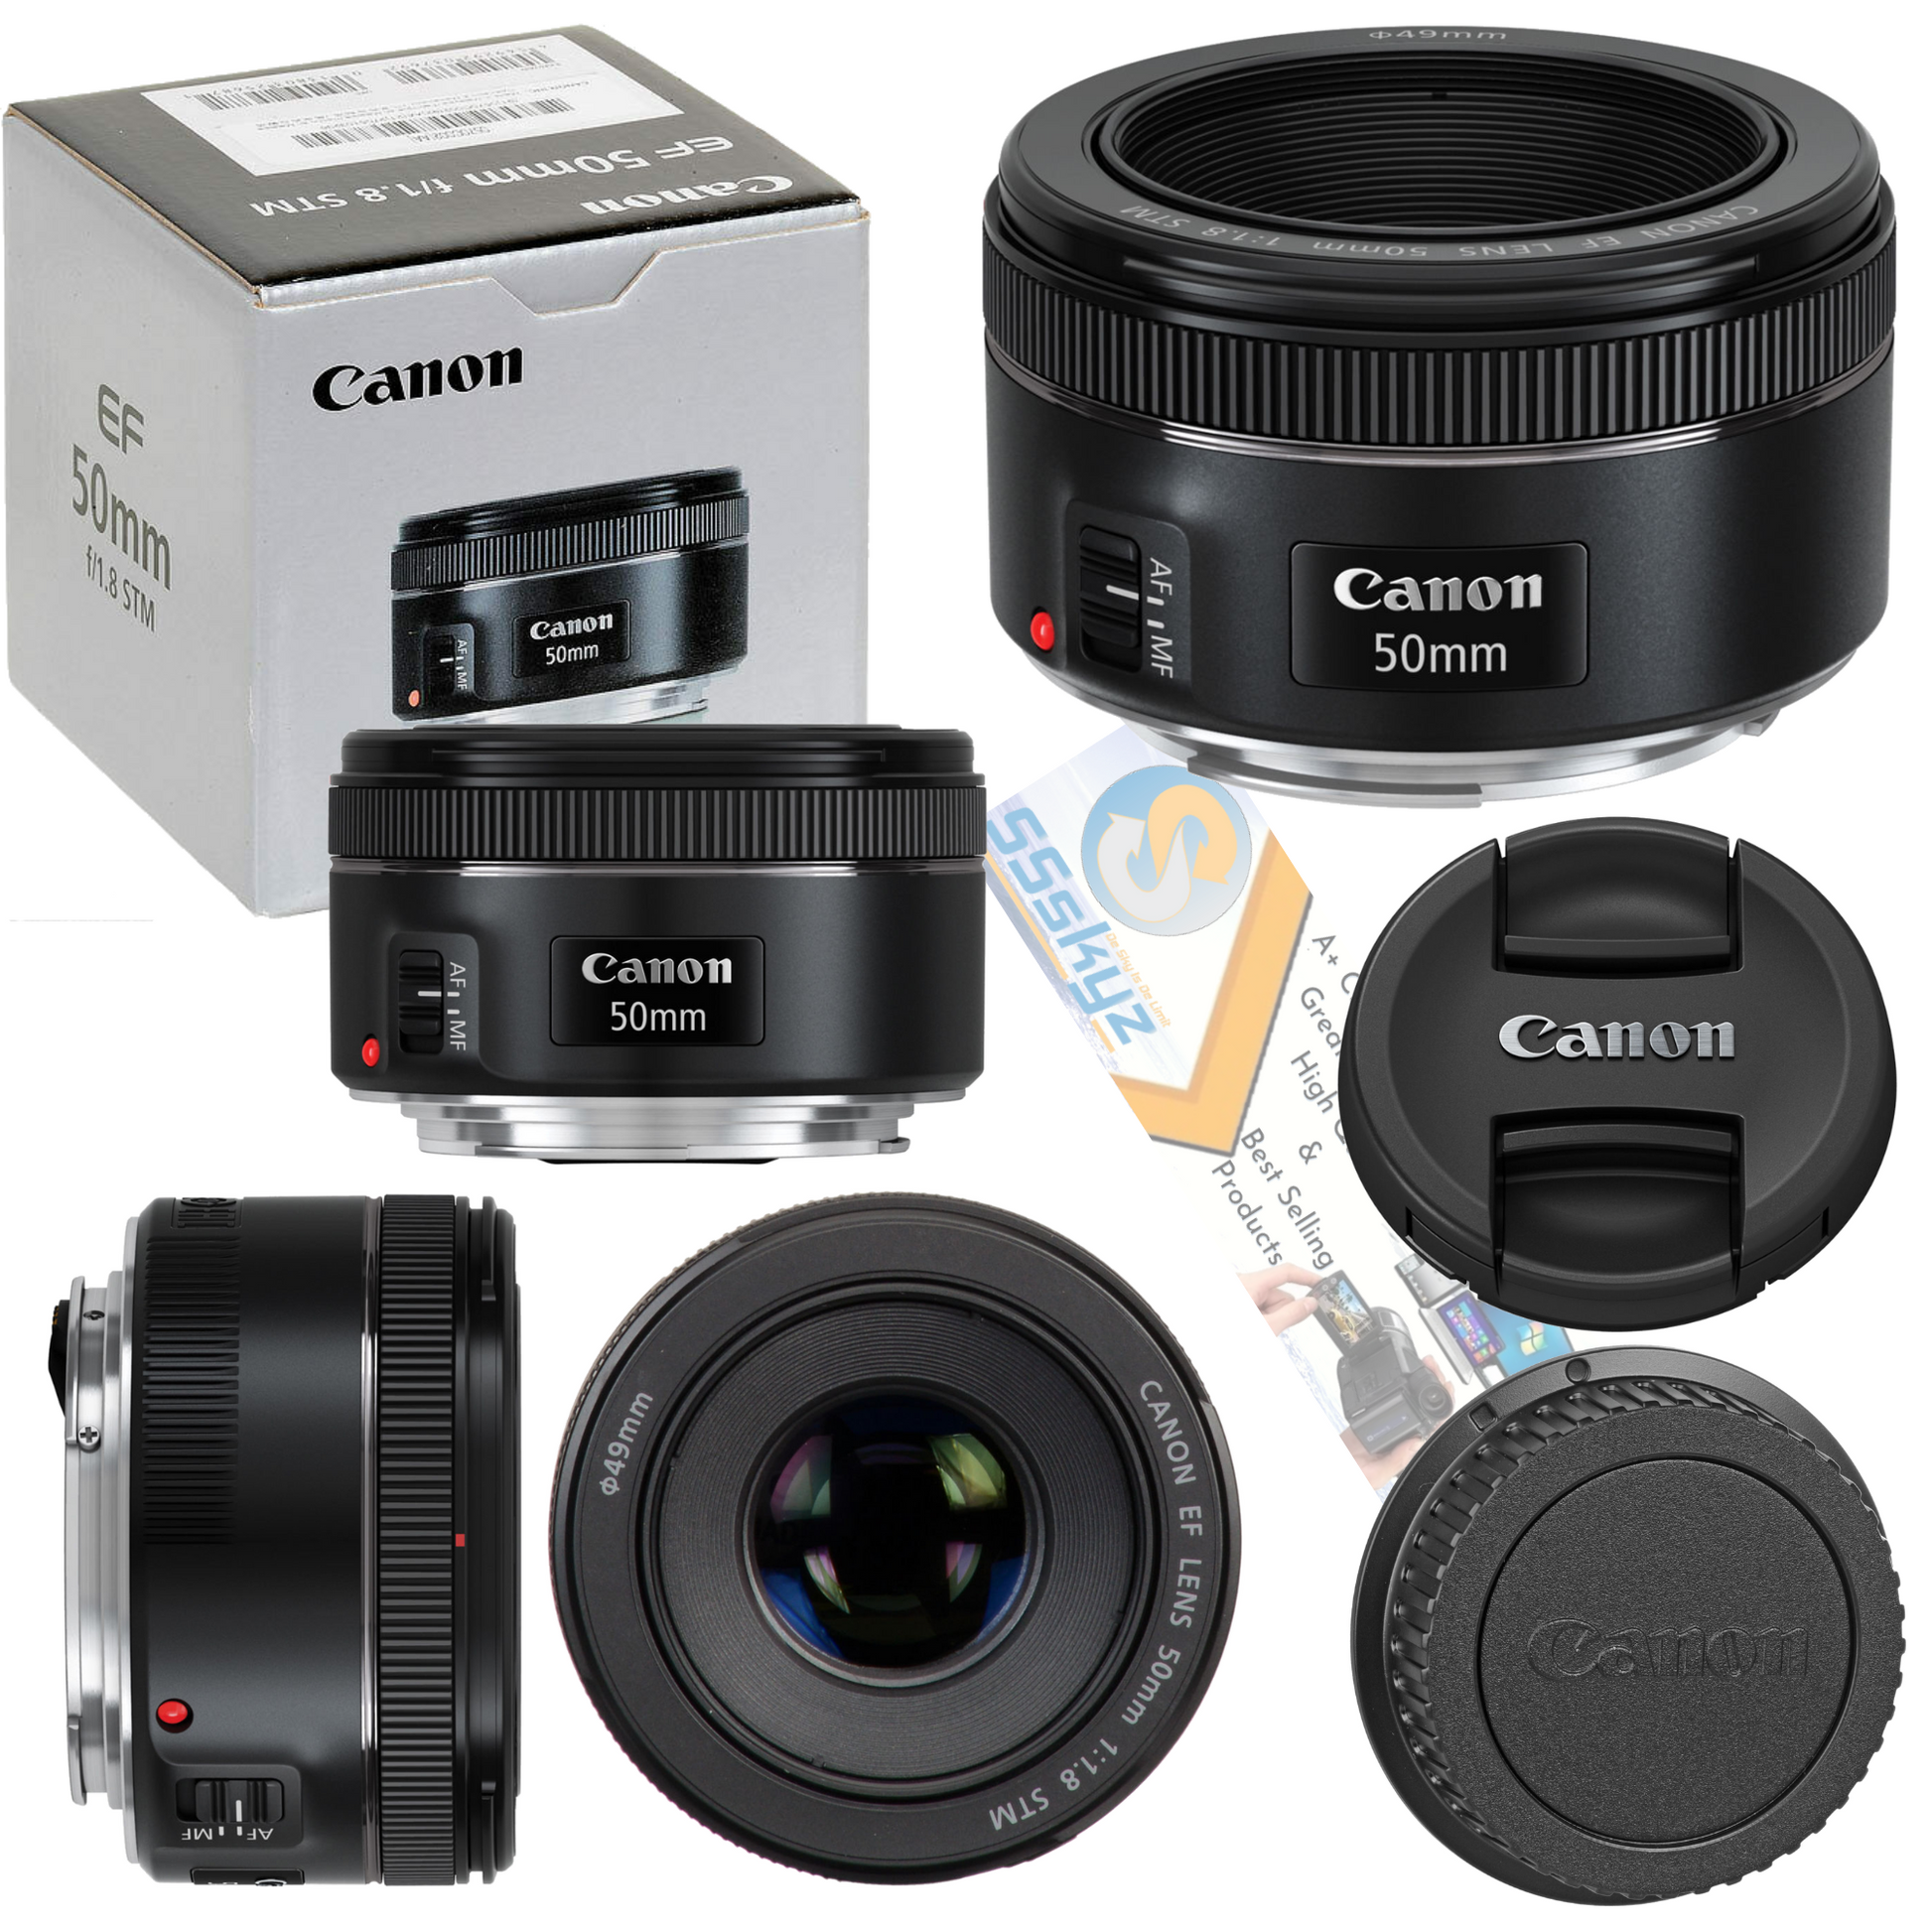 Canon 50mm f/1.8 STM - Like New! From Stephen's Gear Shop On Gear Focus